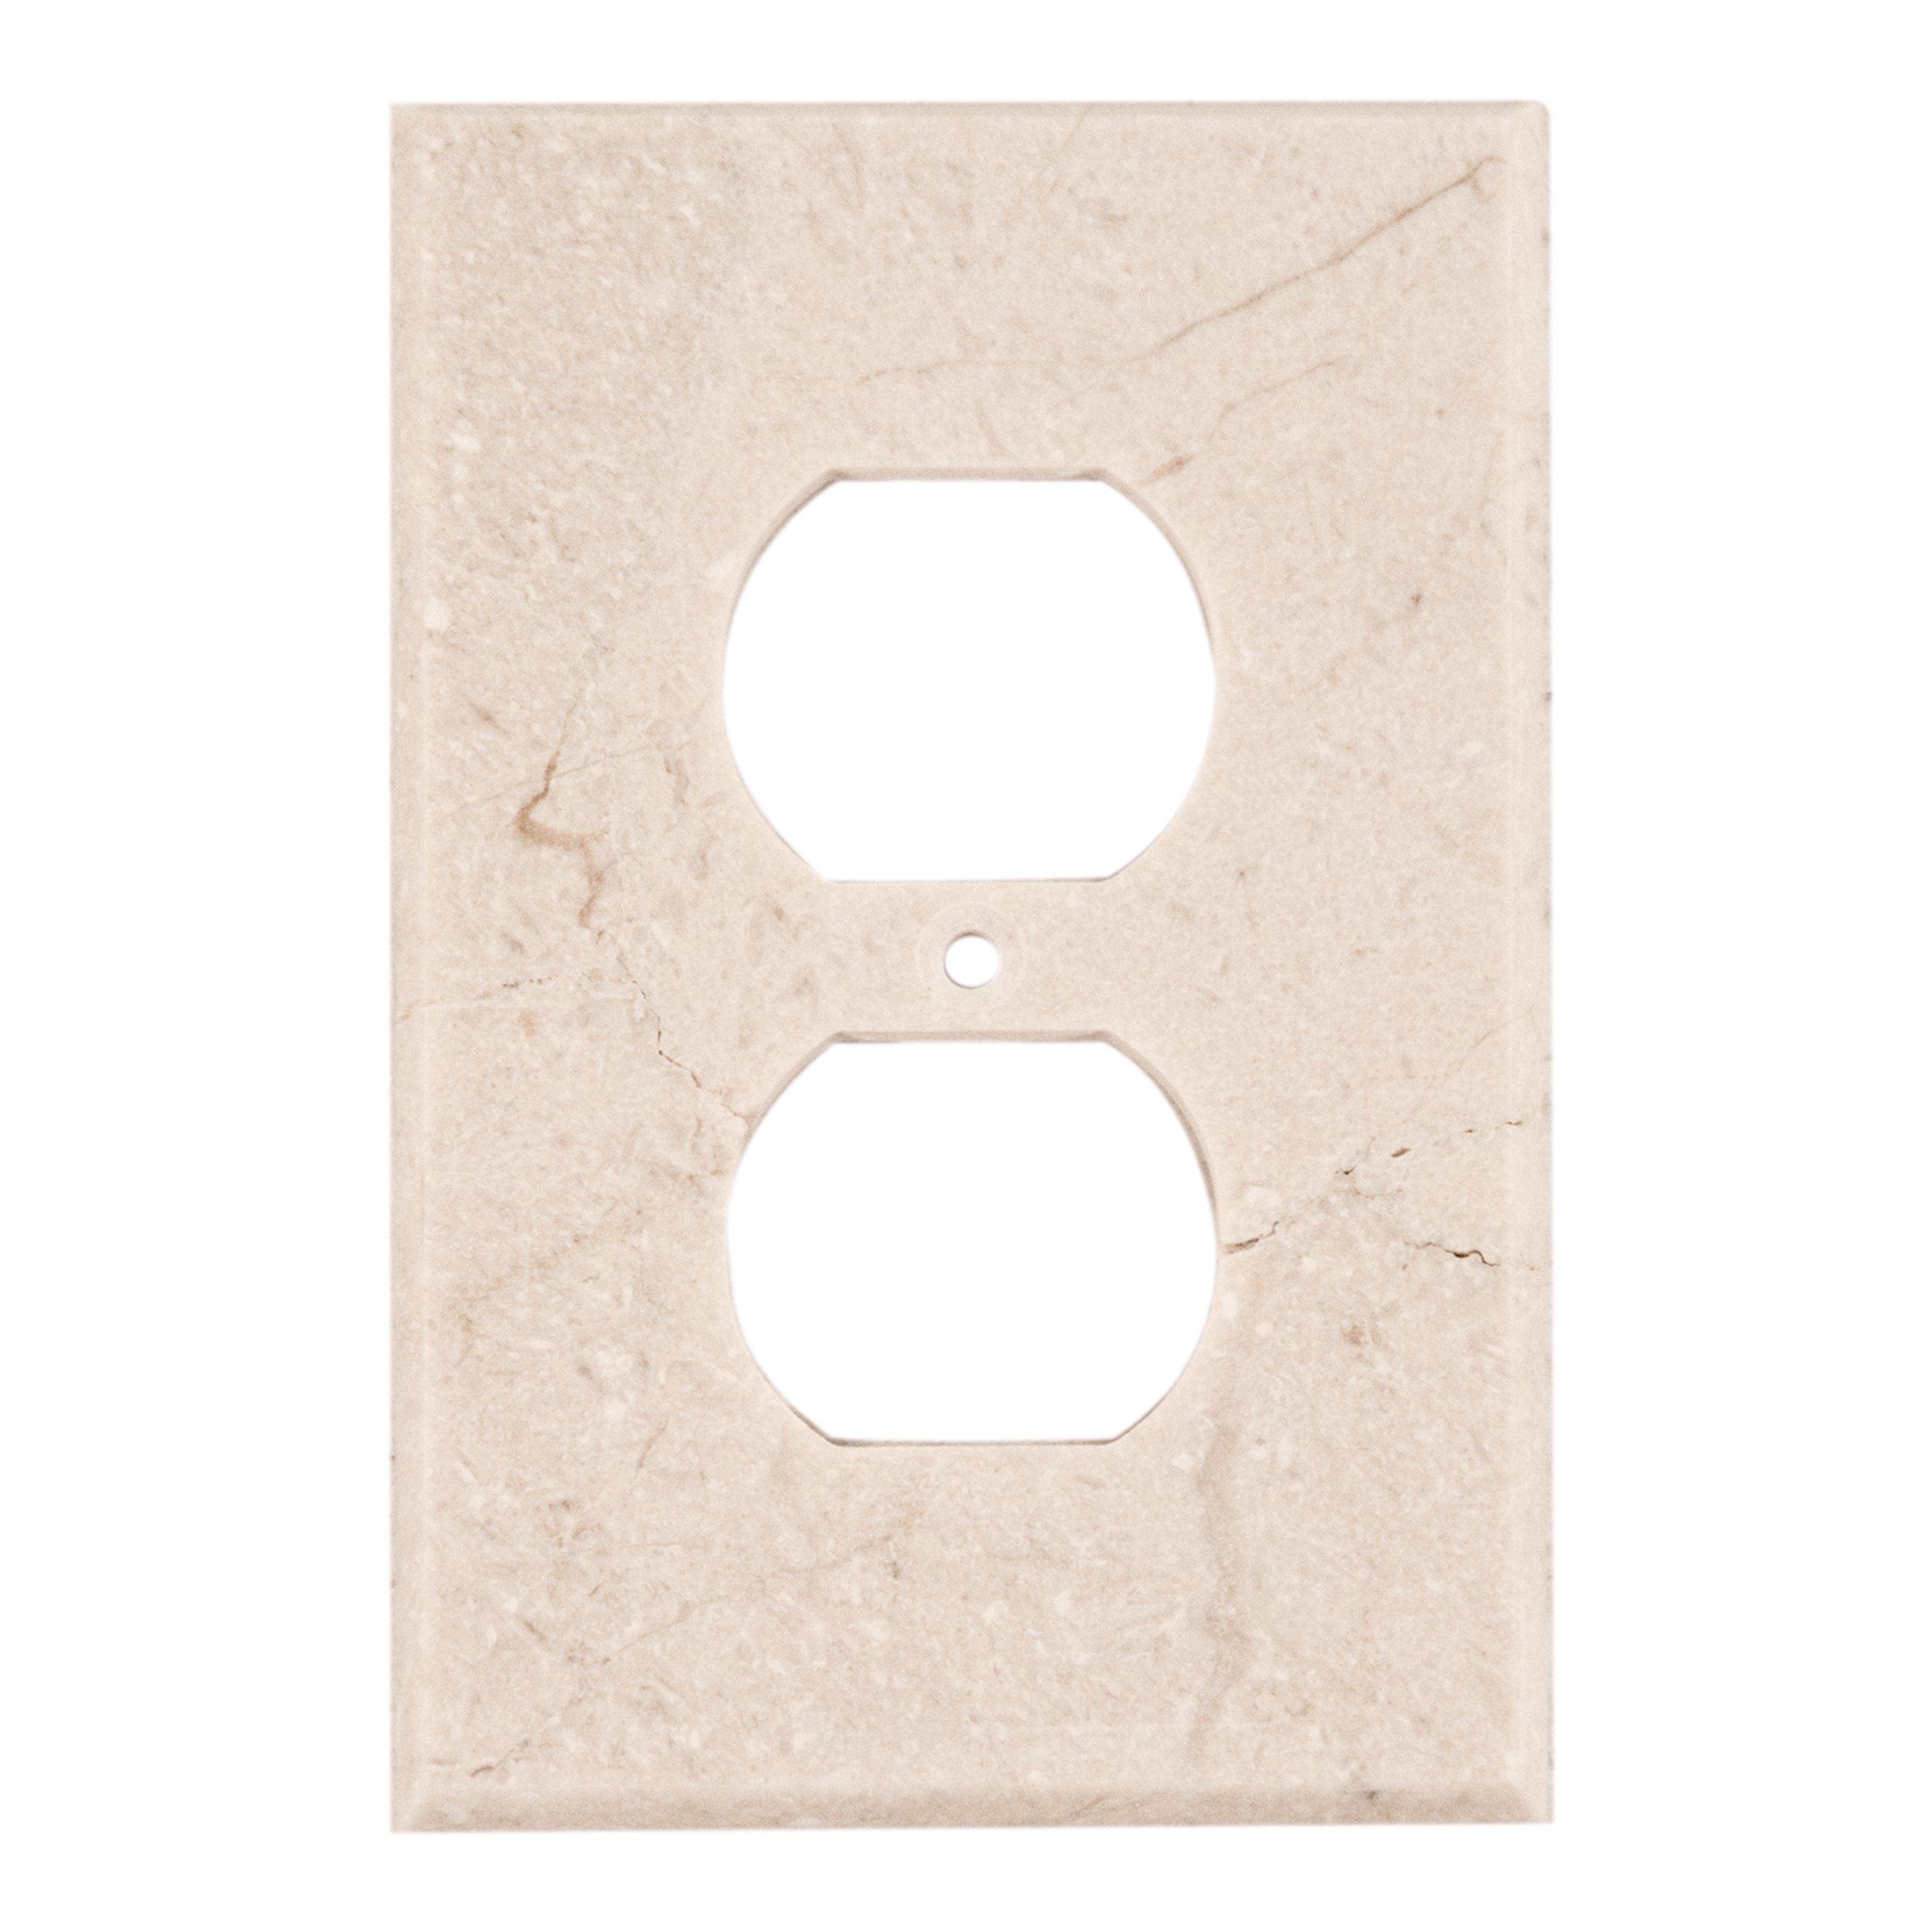 Crema Marfil Marble Outlet Plate